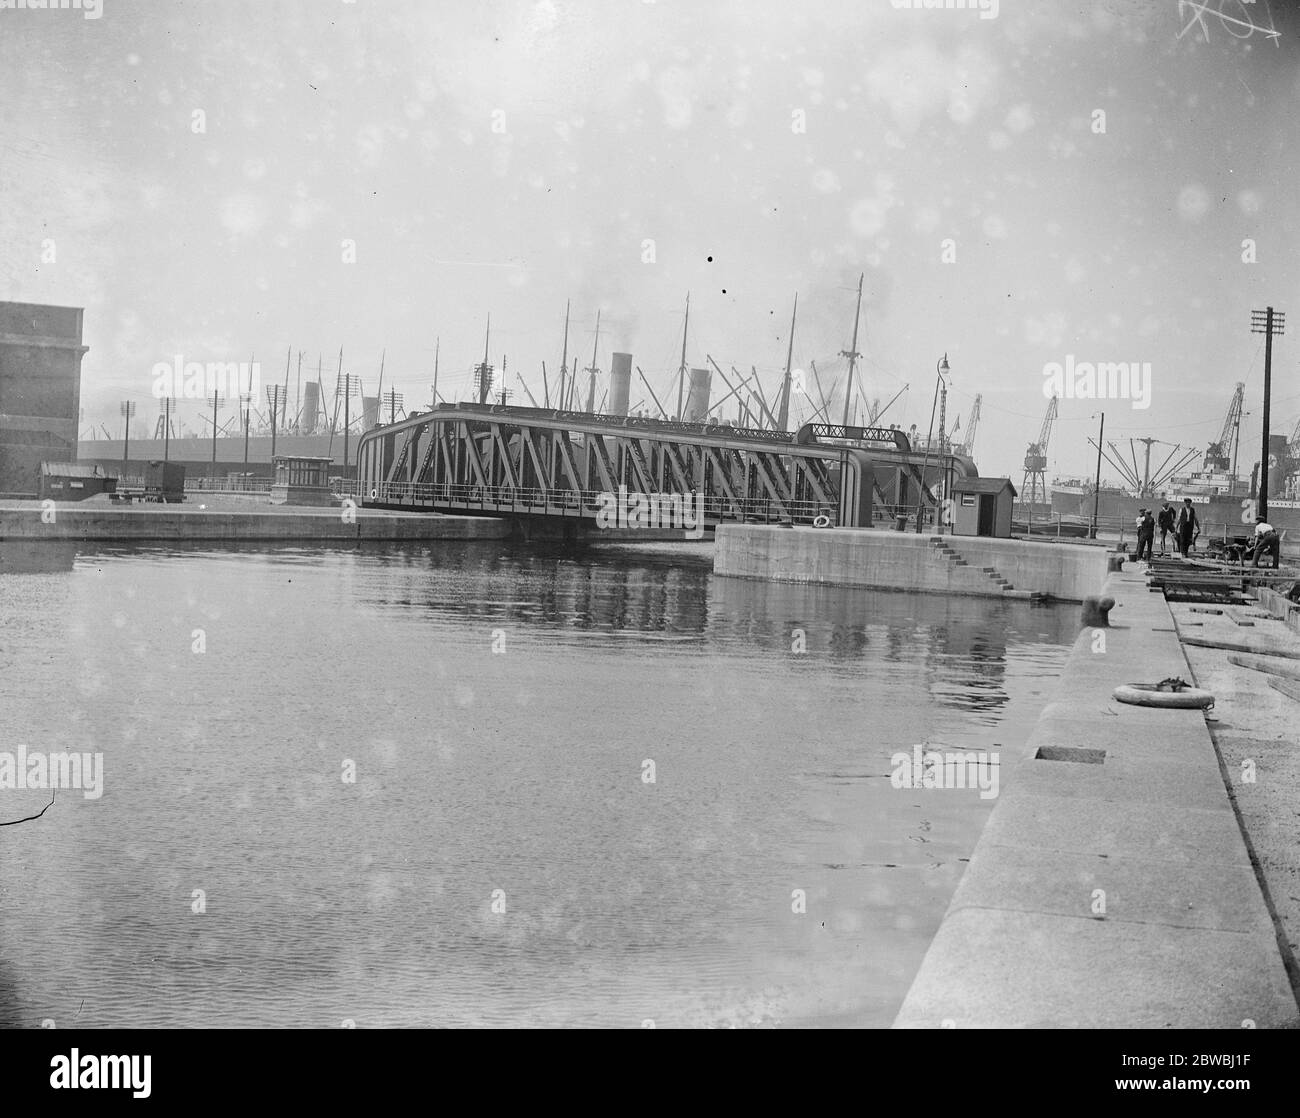 Royal Albert Docks . New South Extension The new swing bridge at the passage between the old and new docks 23 June 1921 Stock Photo